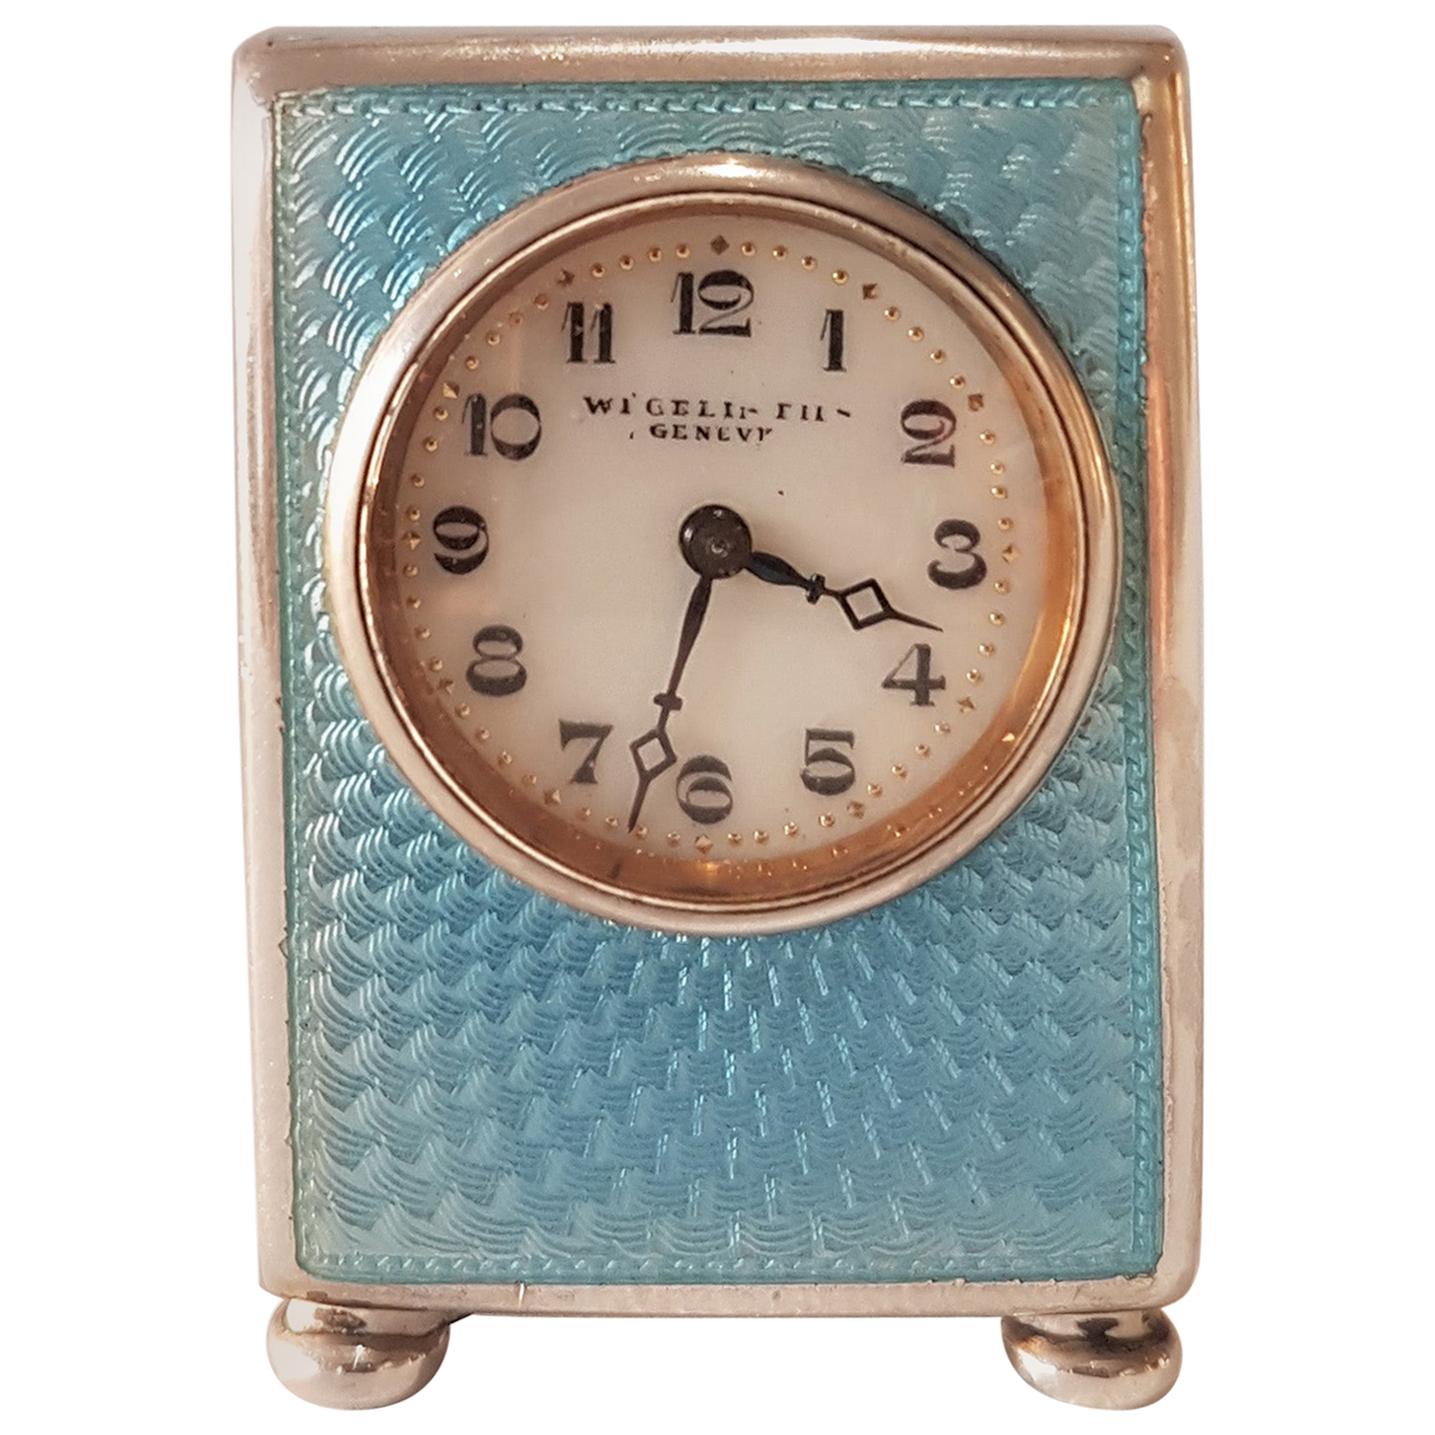 Blue Guilloche Enamel and Silver Sub-Miniature Carriage or Boudoir Clock